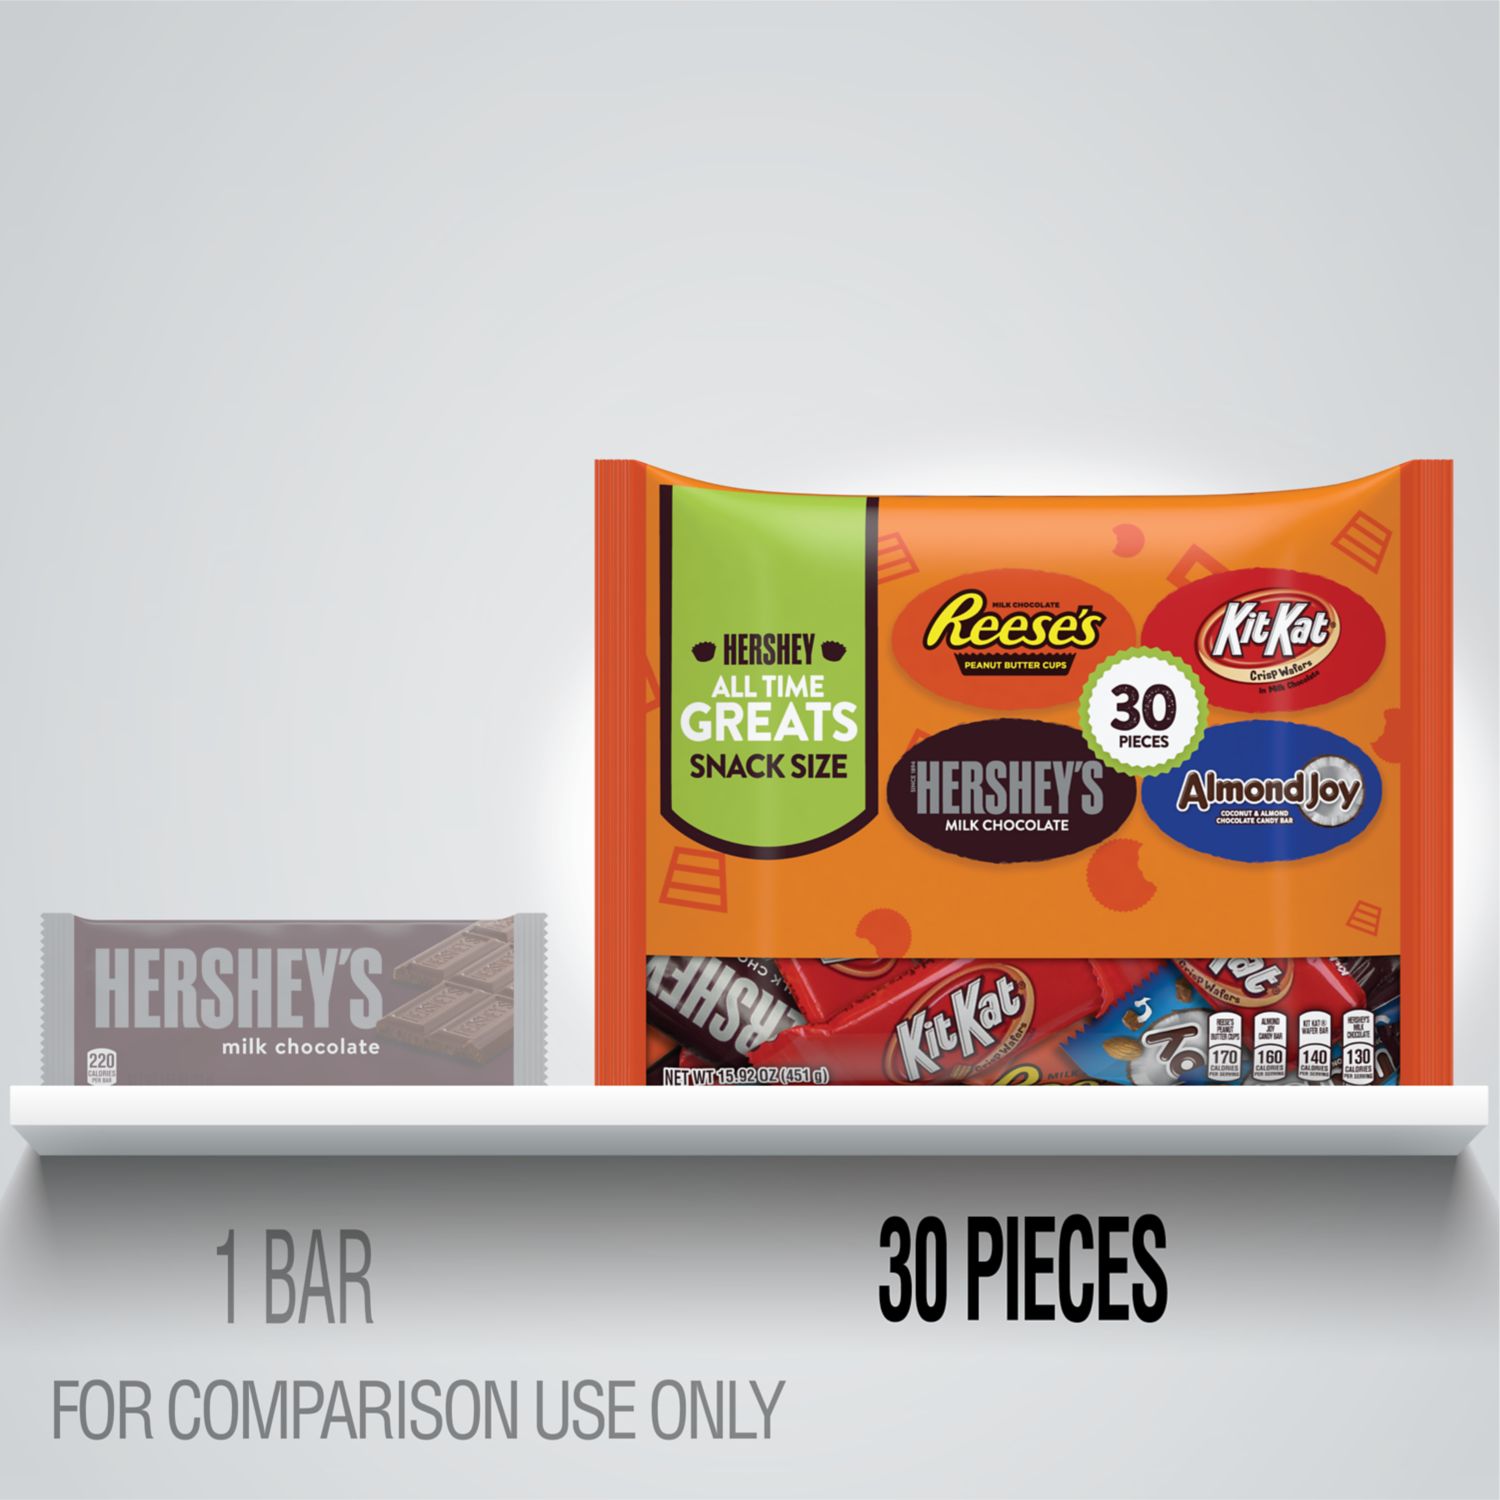 Hershey All Time Greats Chocolate Assortment Snack Size Candy, 15.92 oz, Variety Bag (30 Pieces) - image 3 of 6